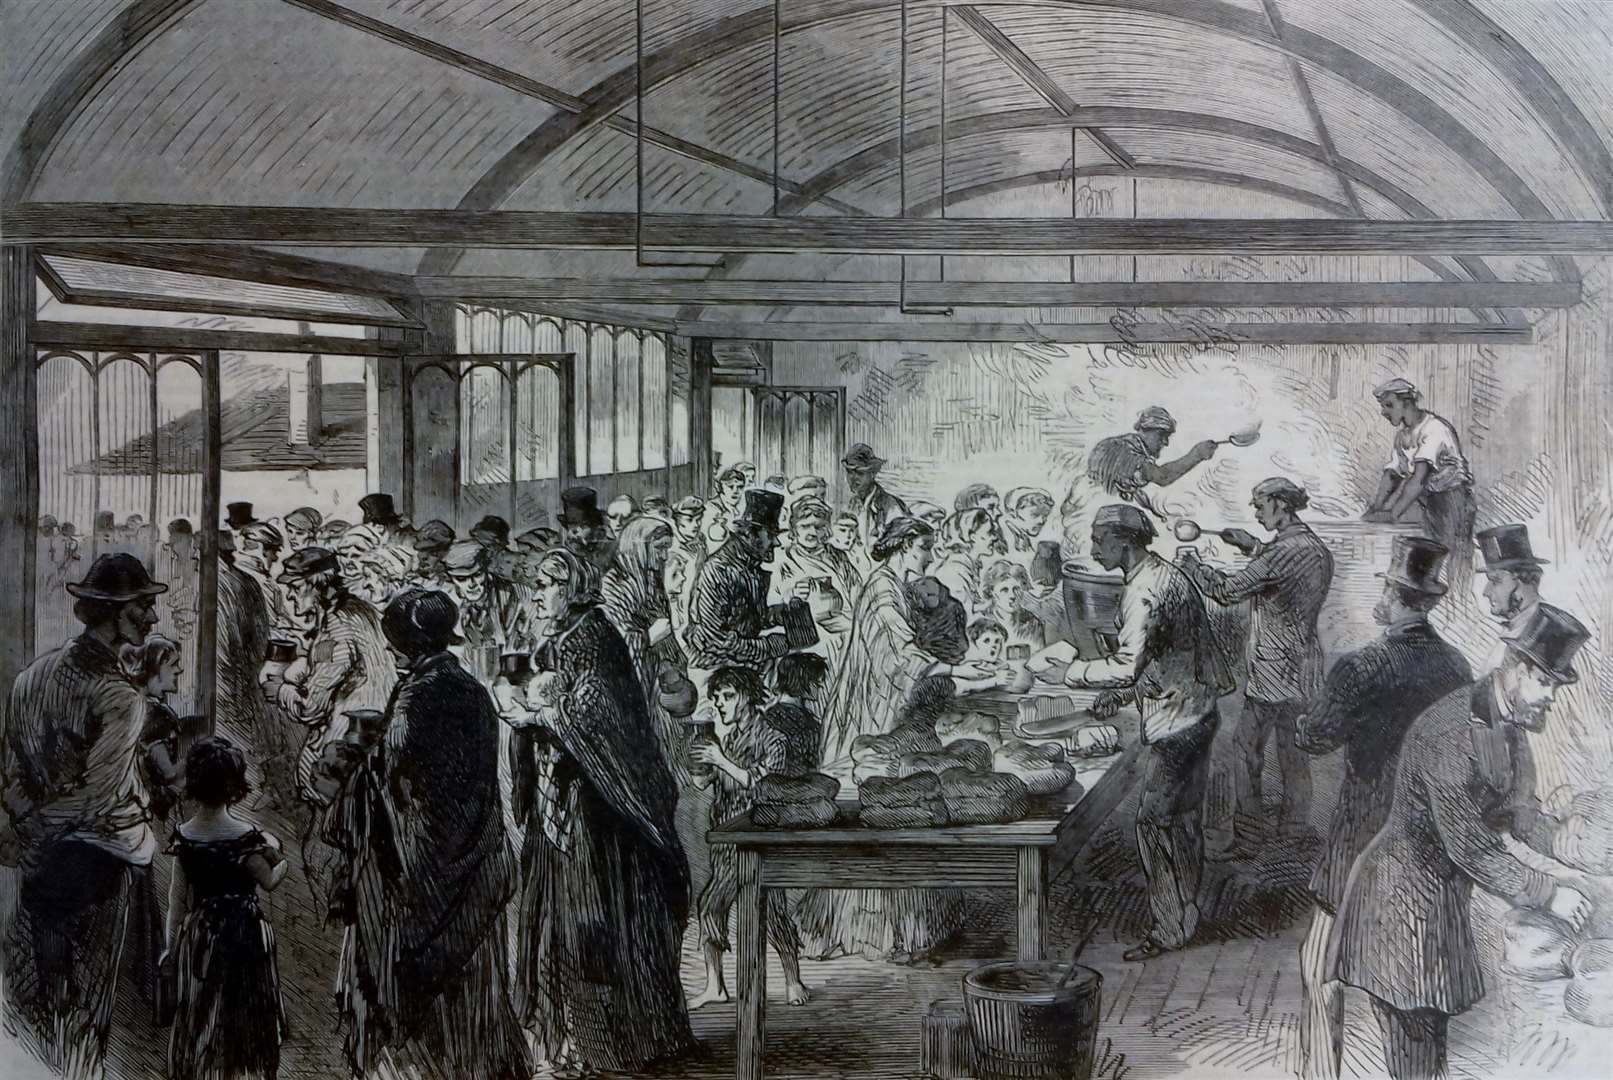 A London soup kitchen in 1868 - would the Deal one look the same